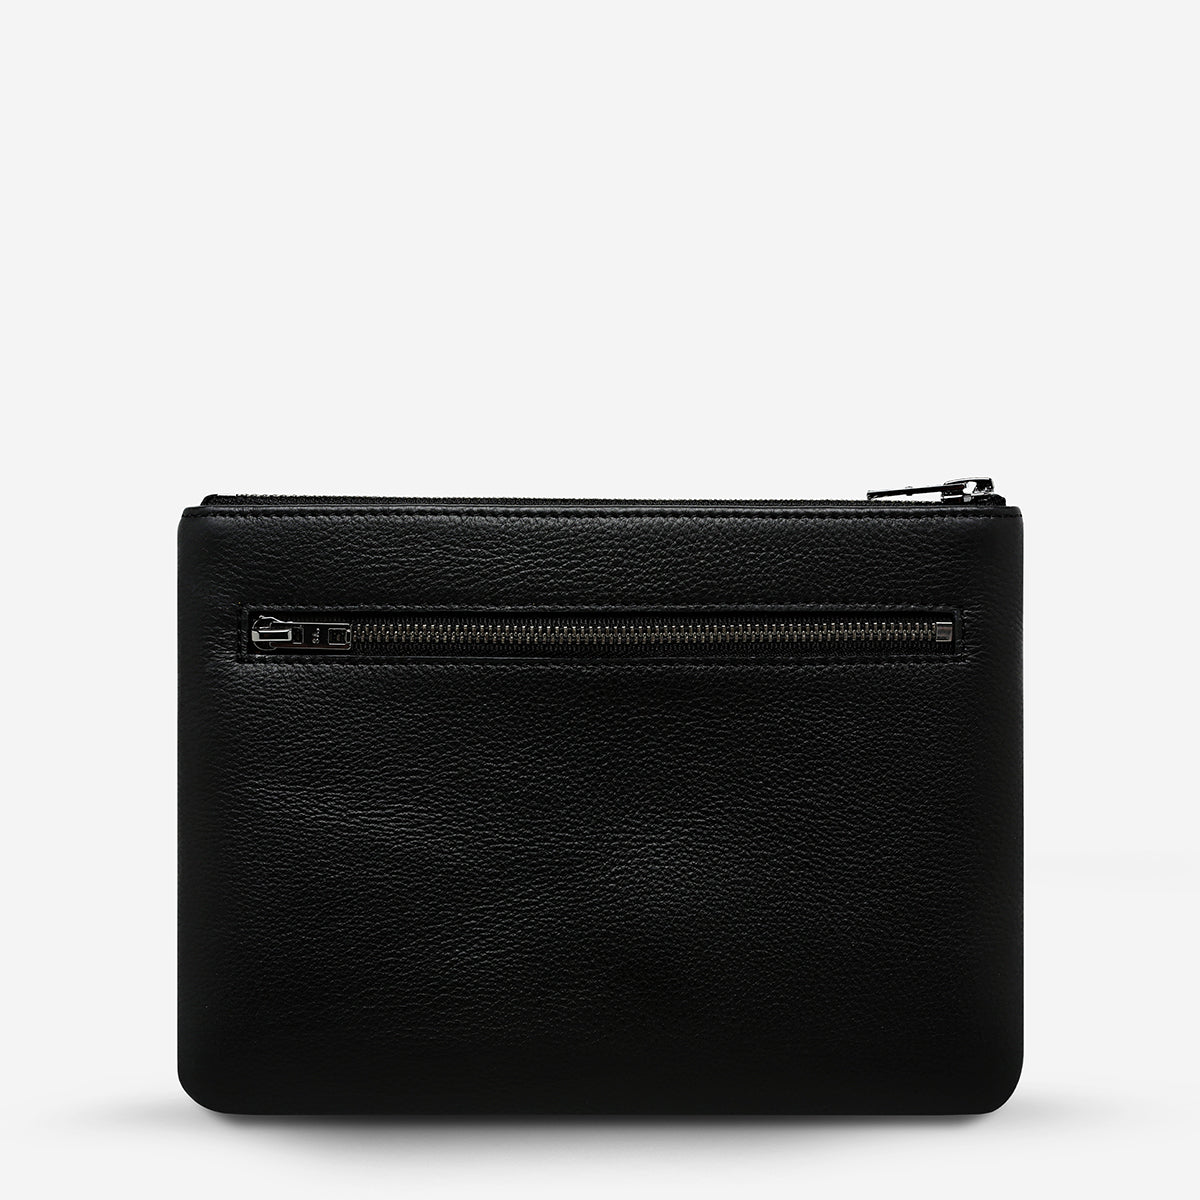 status-anxiety-wallet-new-day-black-back.jpg